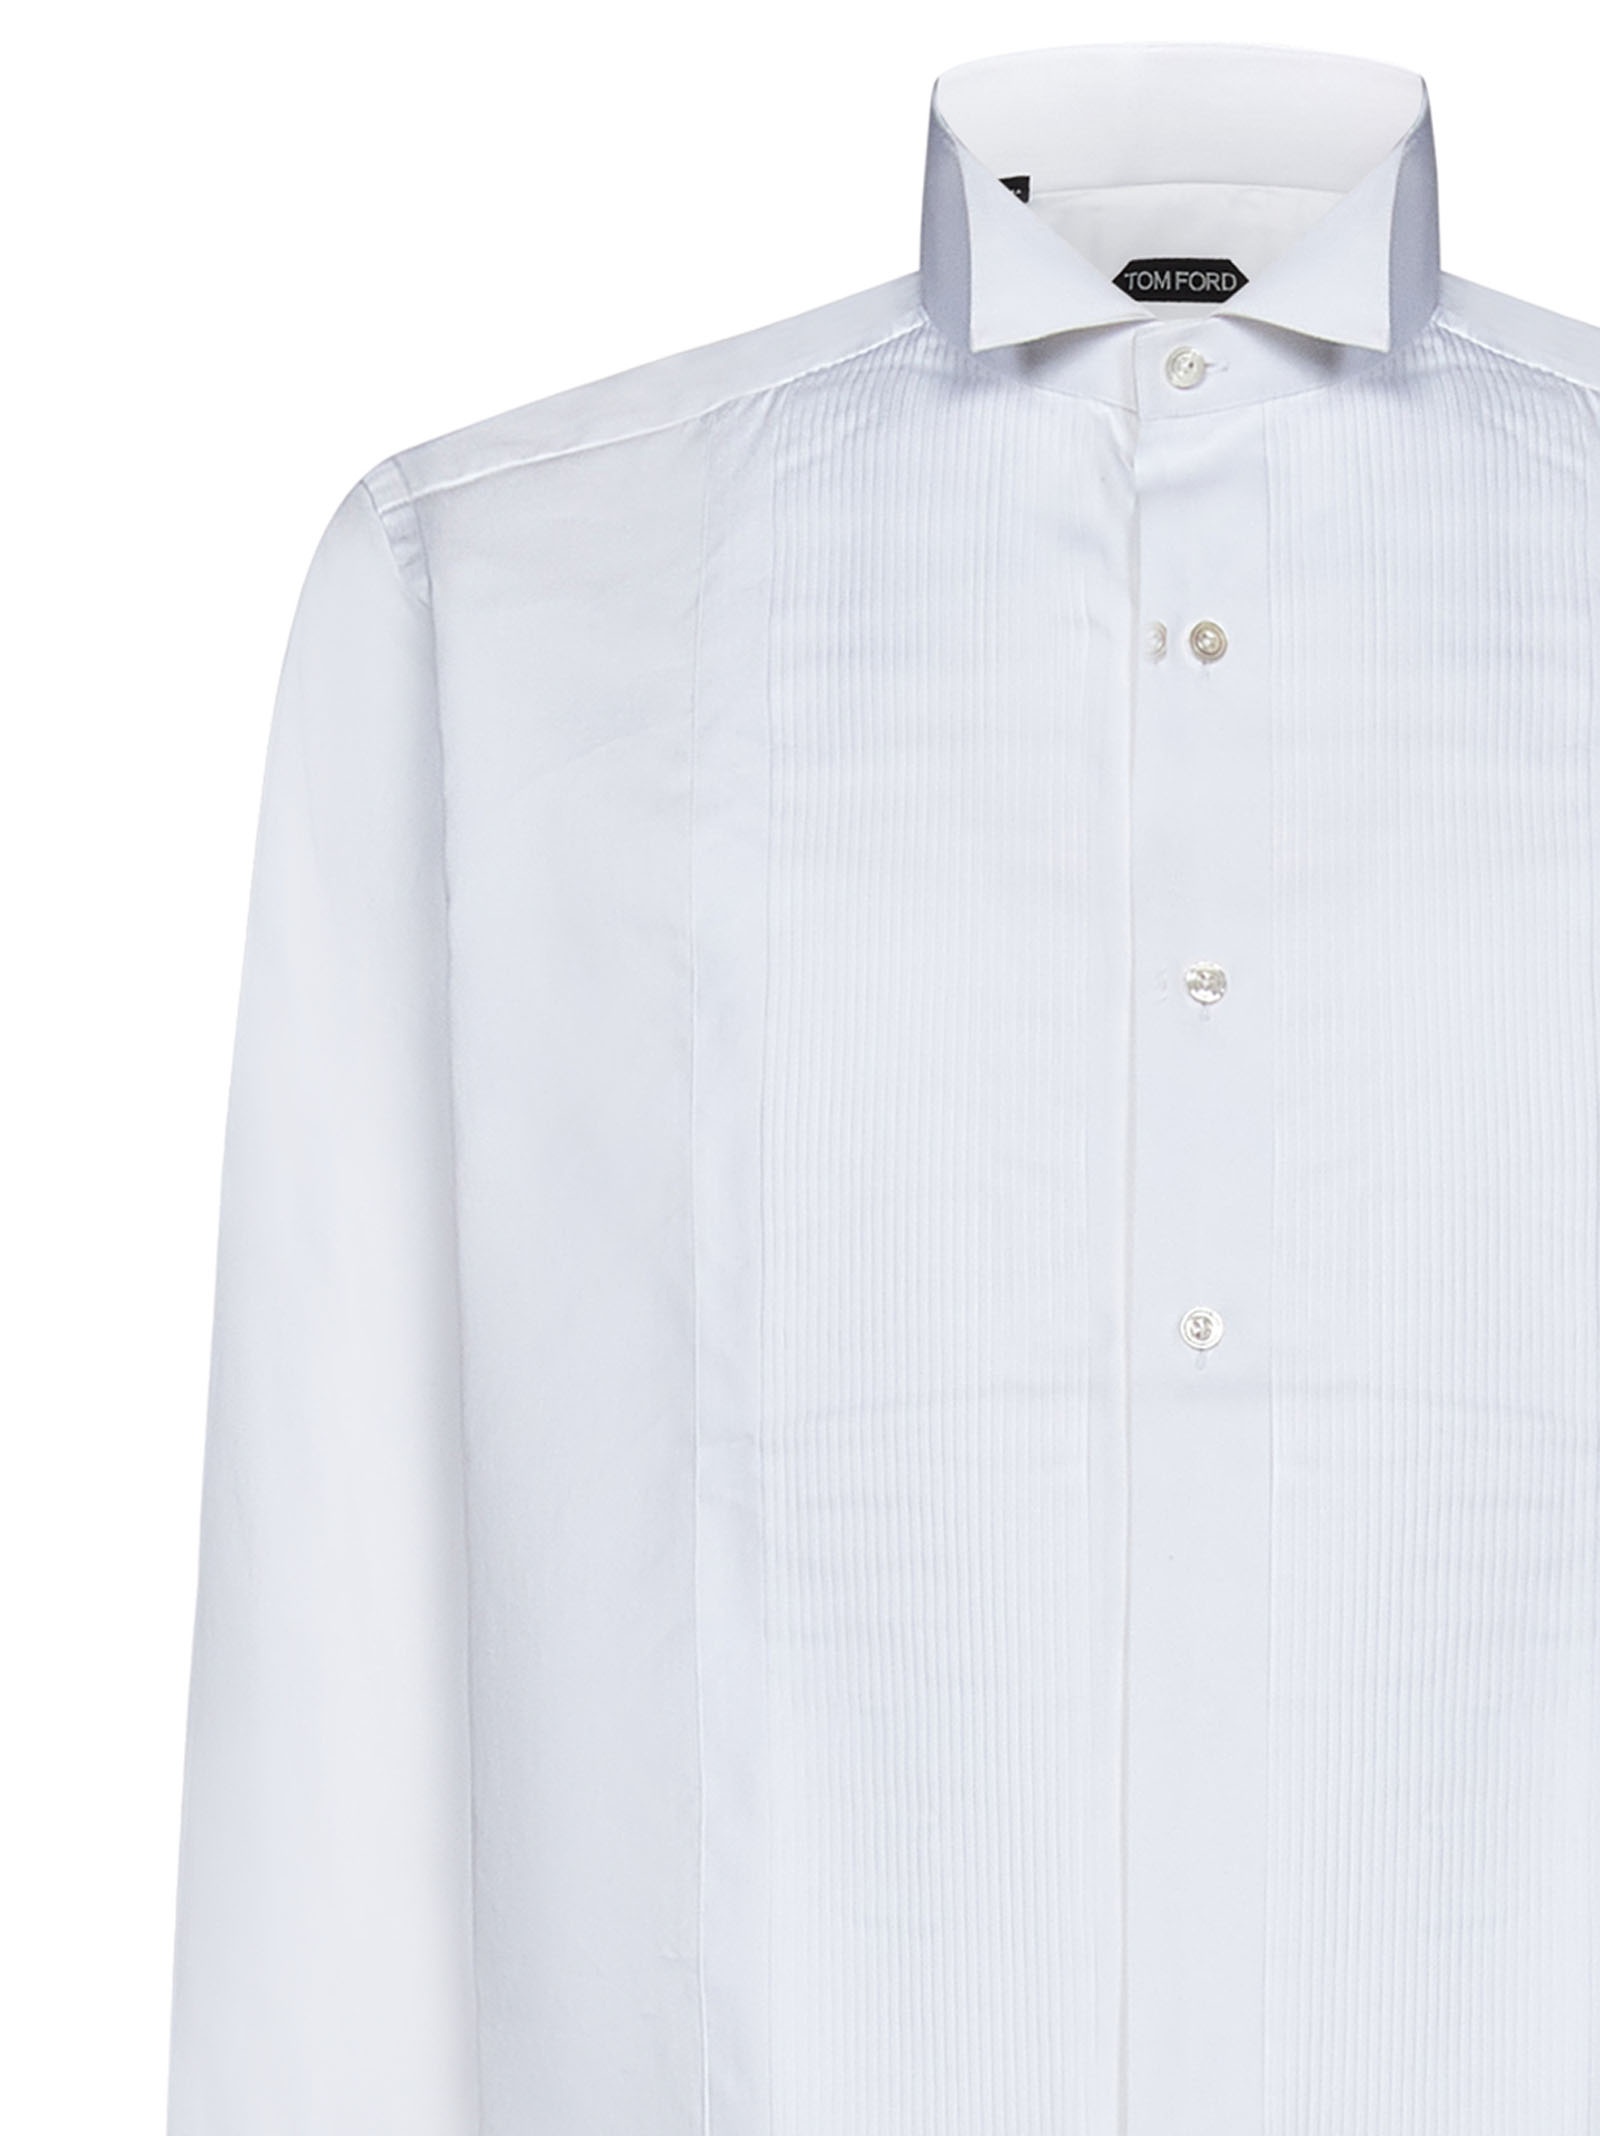 Optical white cotton and silk tuxedo shirt with pleated plastron and wing collar. - 3